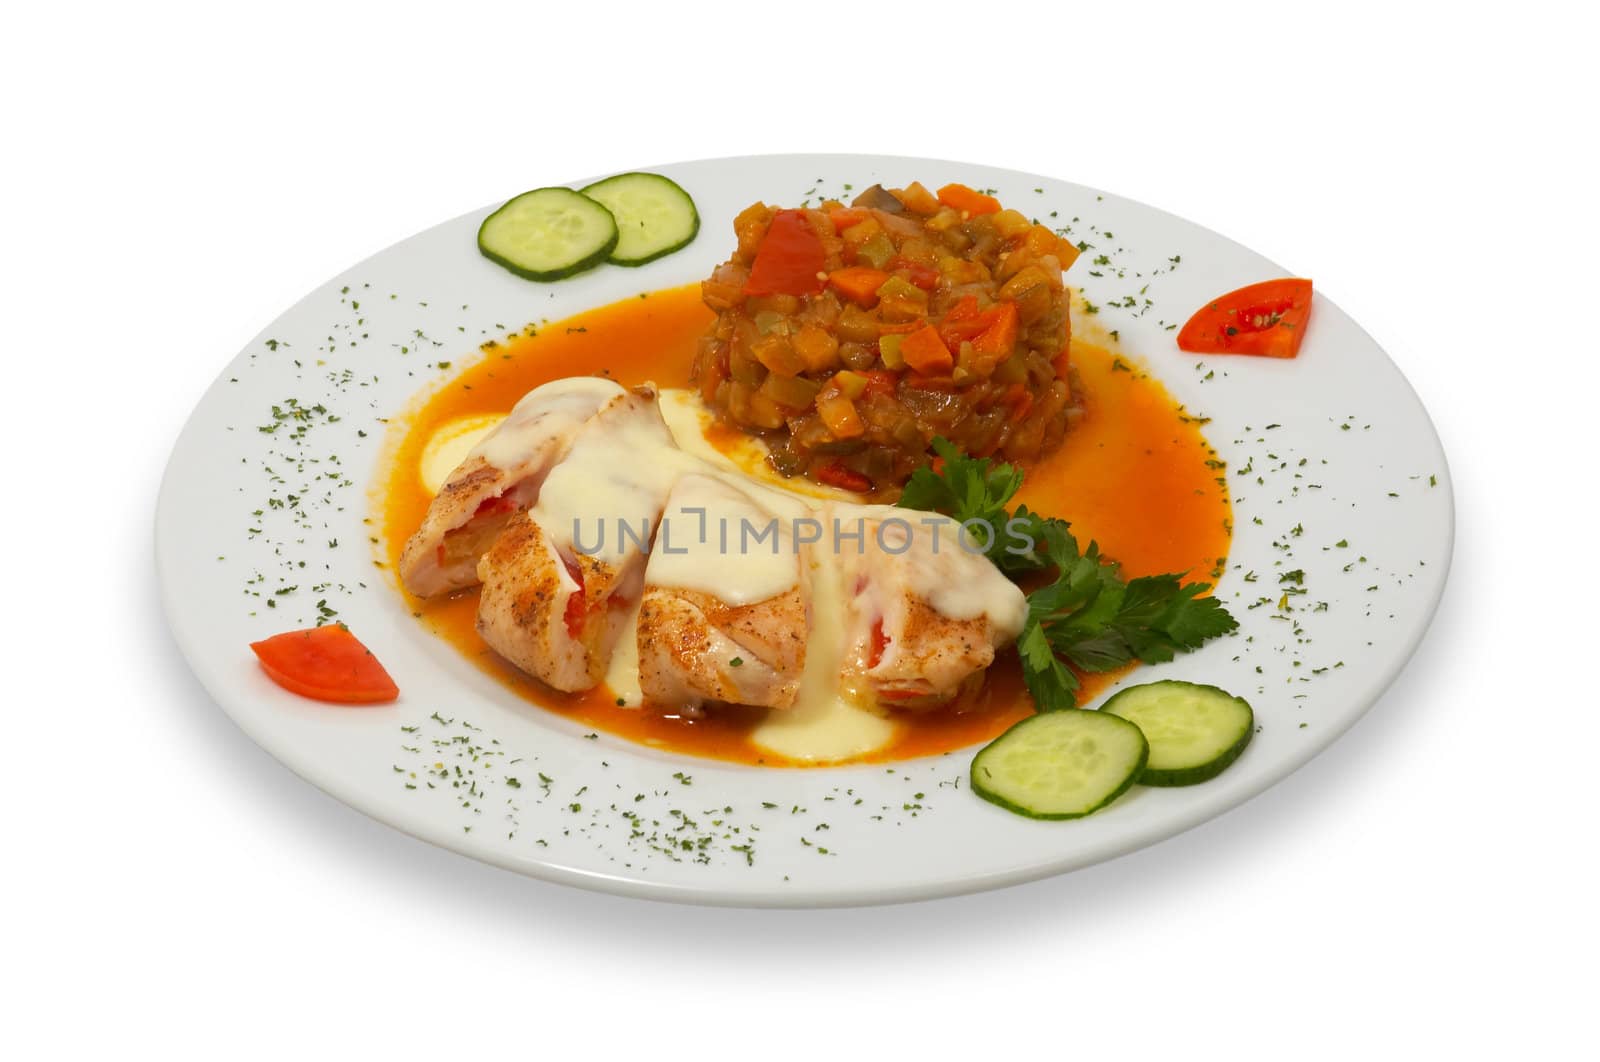 grilled stuffed chicken fillet by starush